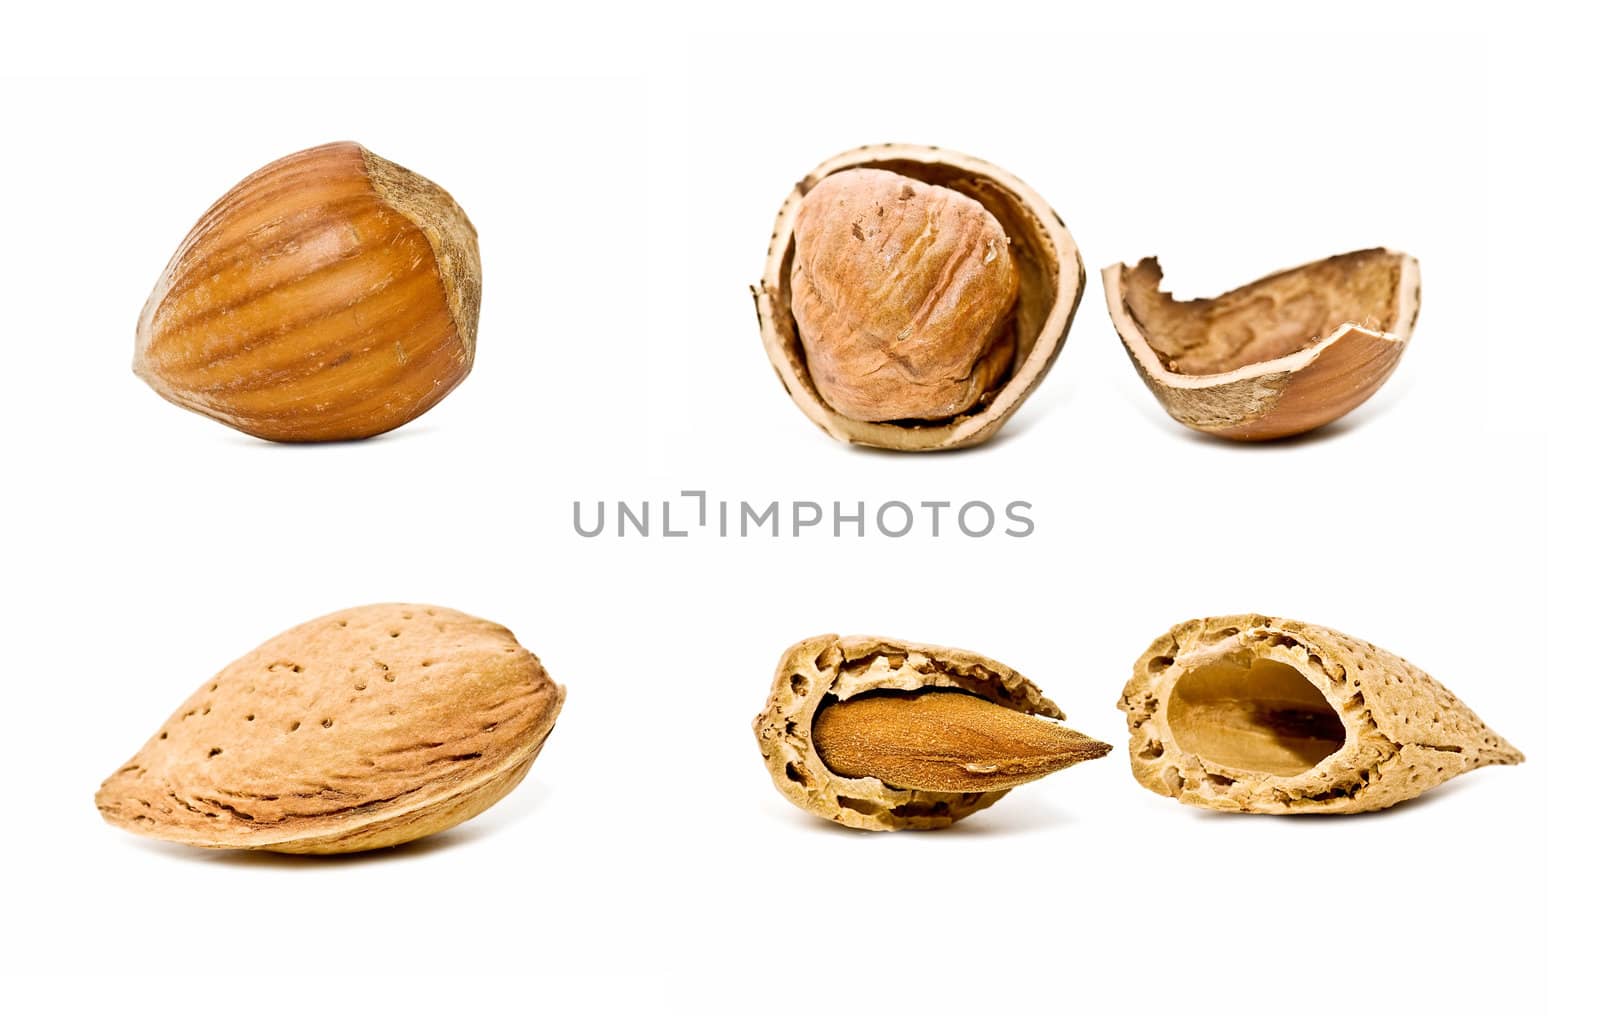 almonds and hazelnuts isolated on white background
